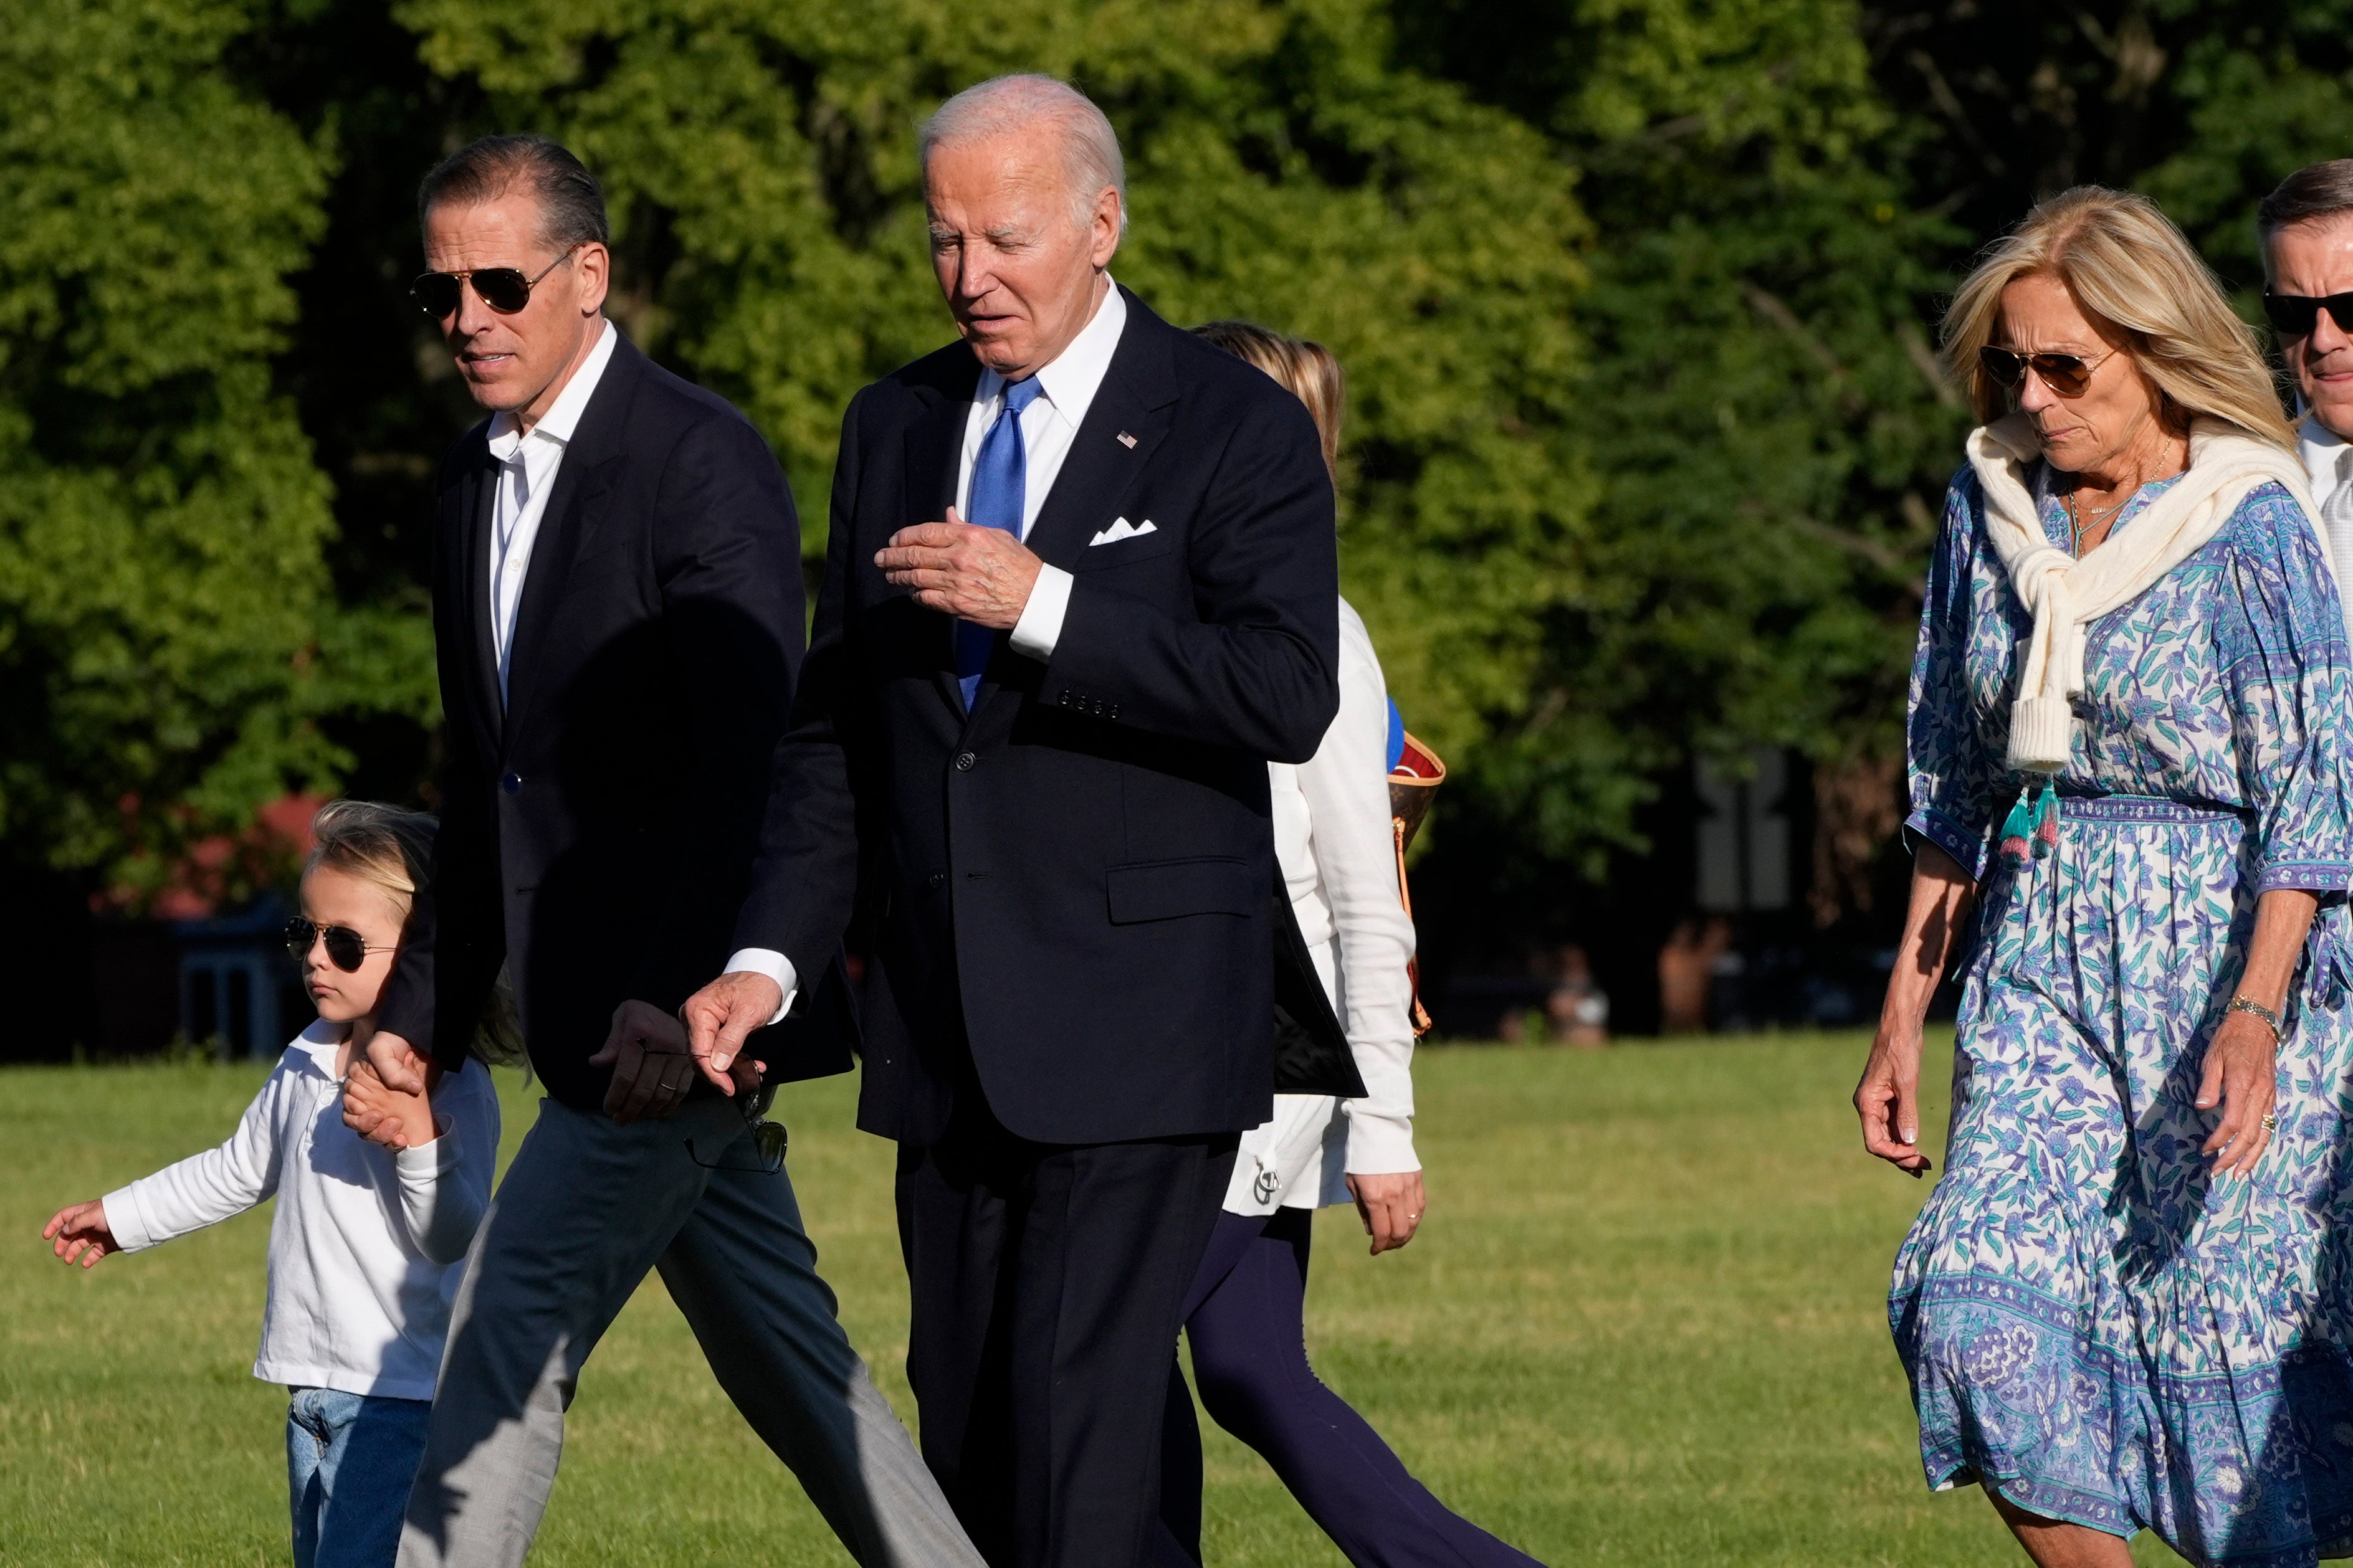 President Joe Biden and his family return to Washington DC on July 1 after a trip to Camp David. In the days after, the younger Biden has “popped into” meetings and phone calls that the president has had with some of his advisers